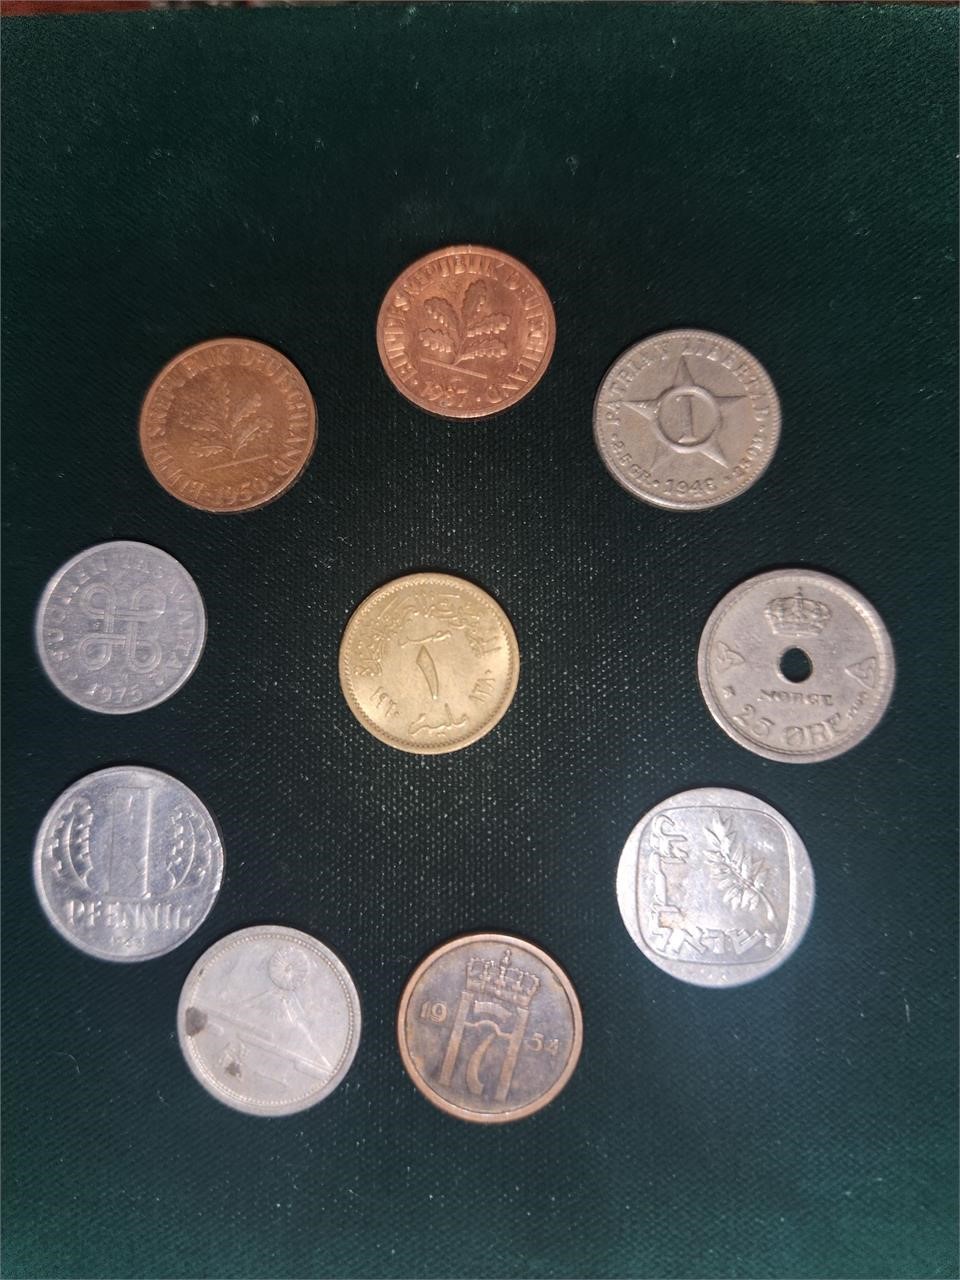 Foreign currency, Silver, old US currency, wheat pennies